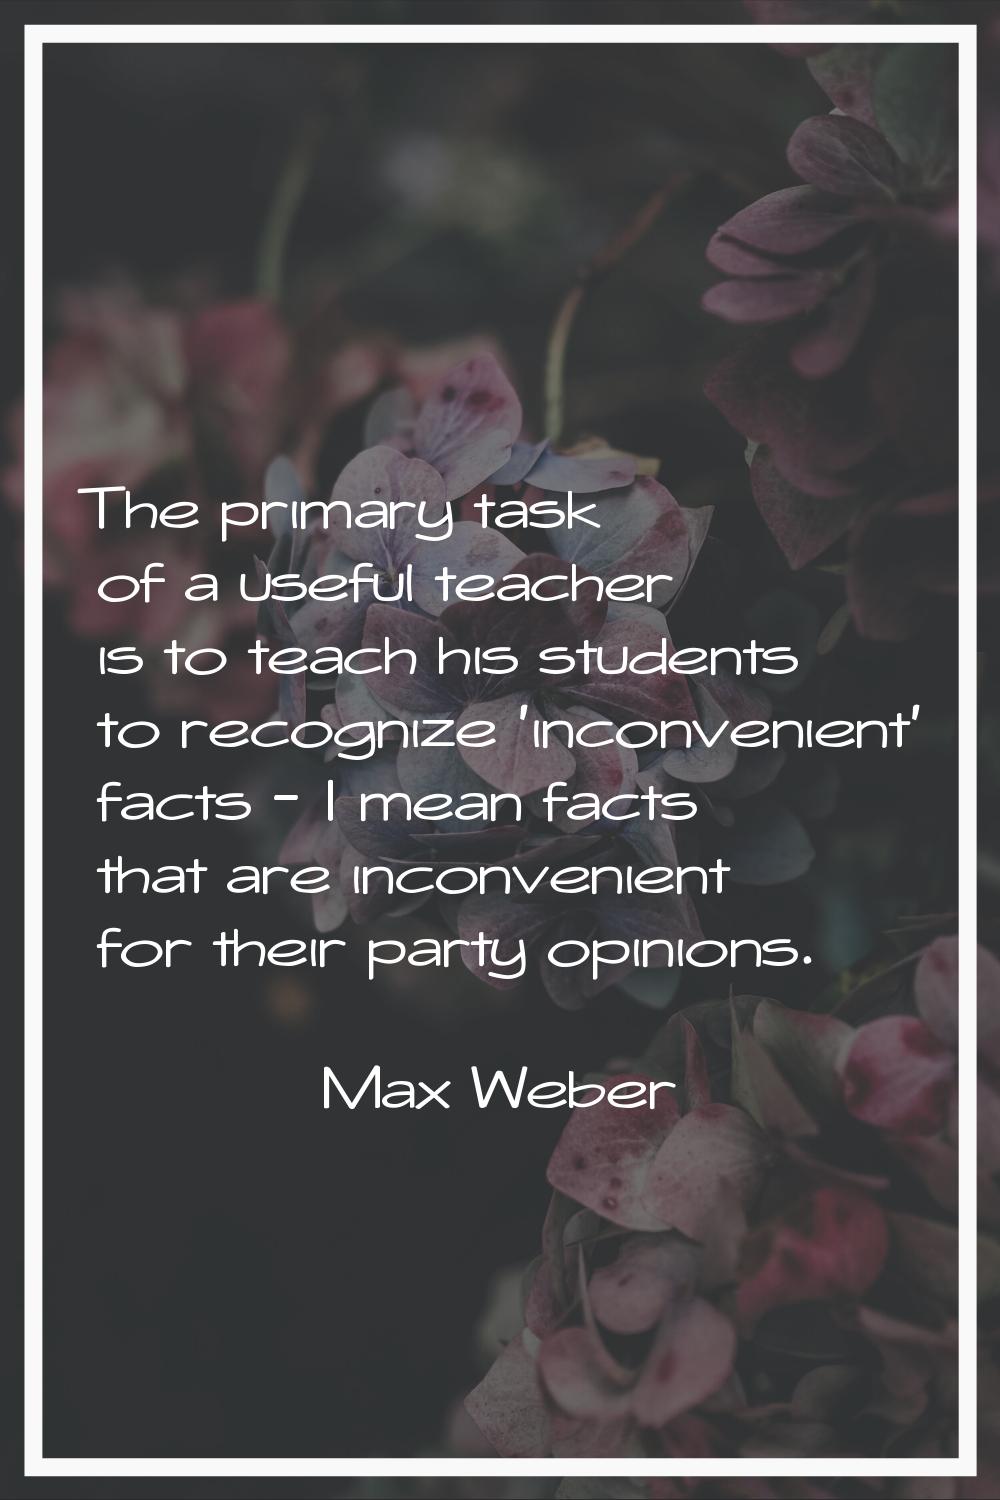 The primary task of a useful teacher is to teach his students to recognize 'inconvenient' facts - I